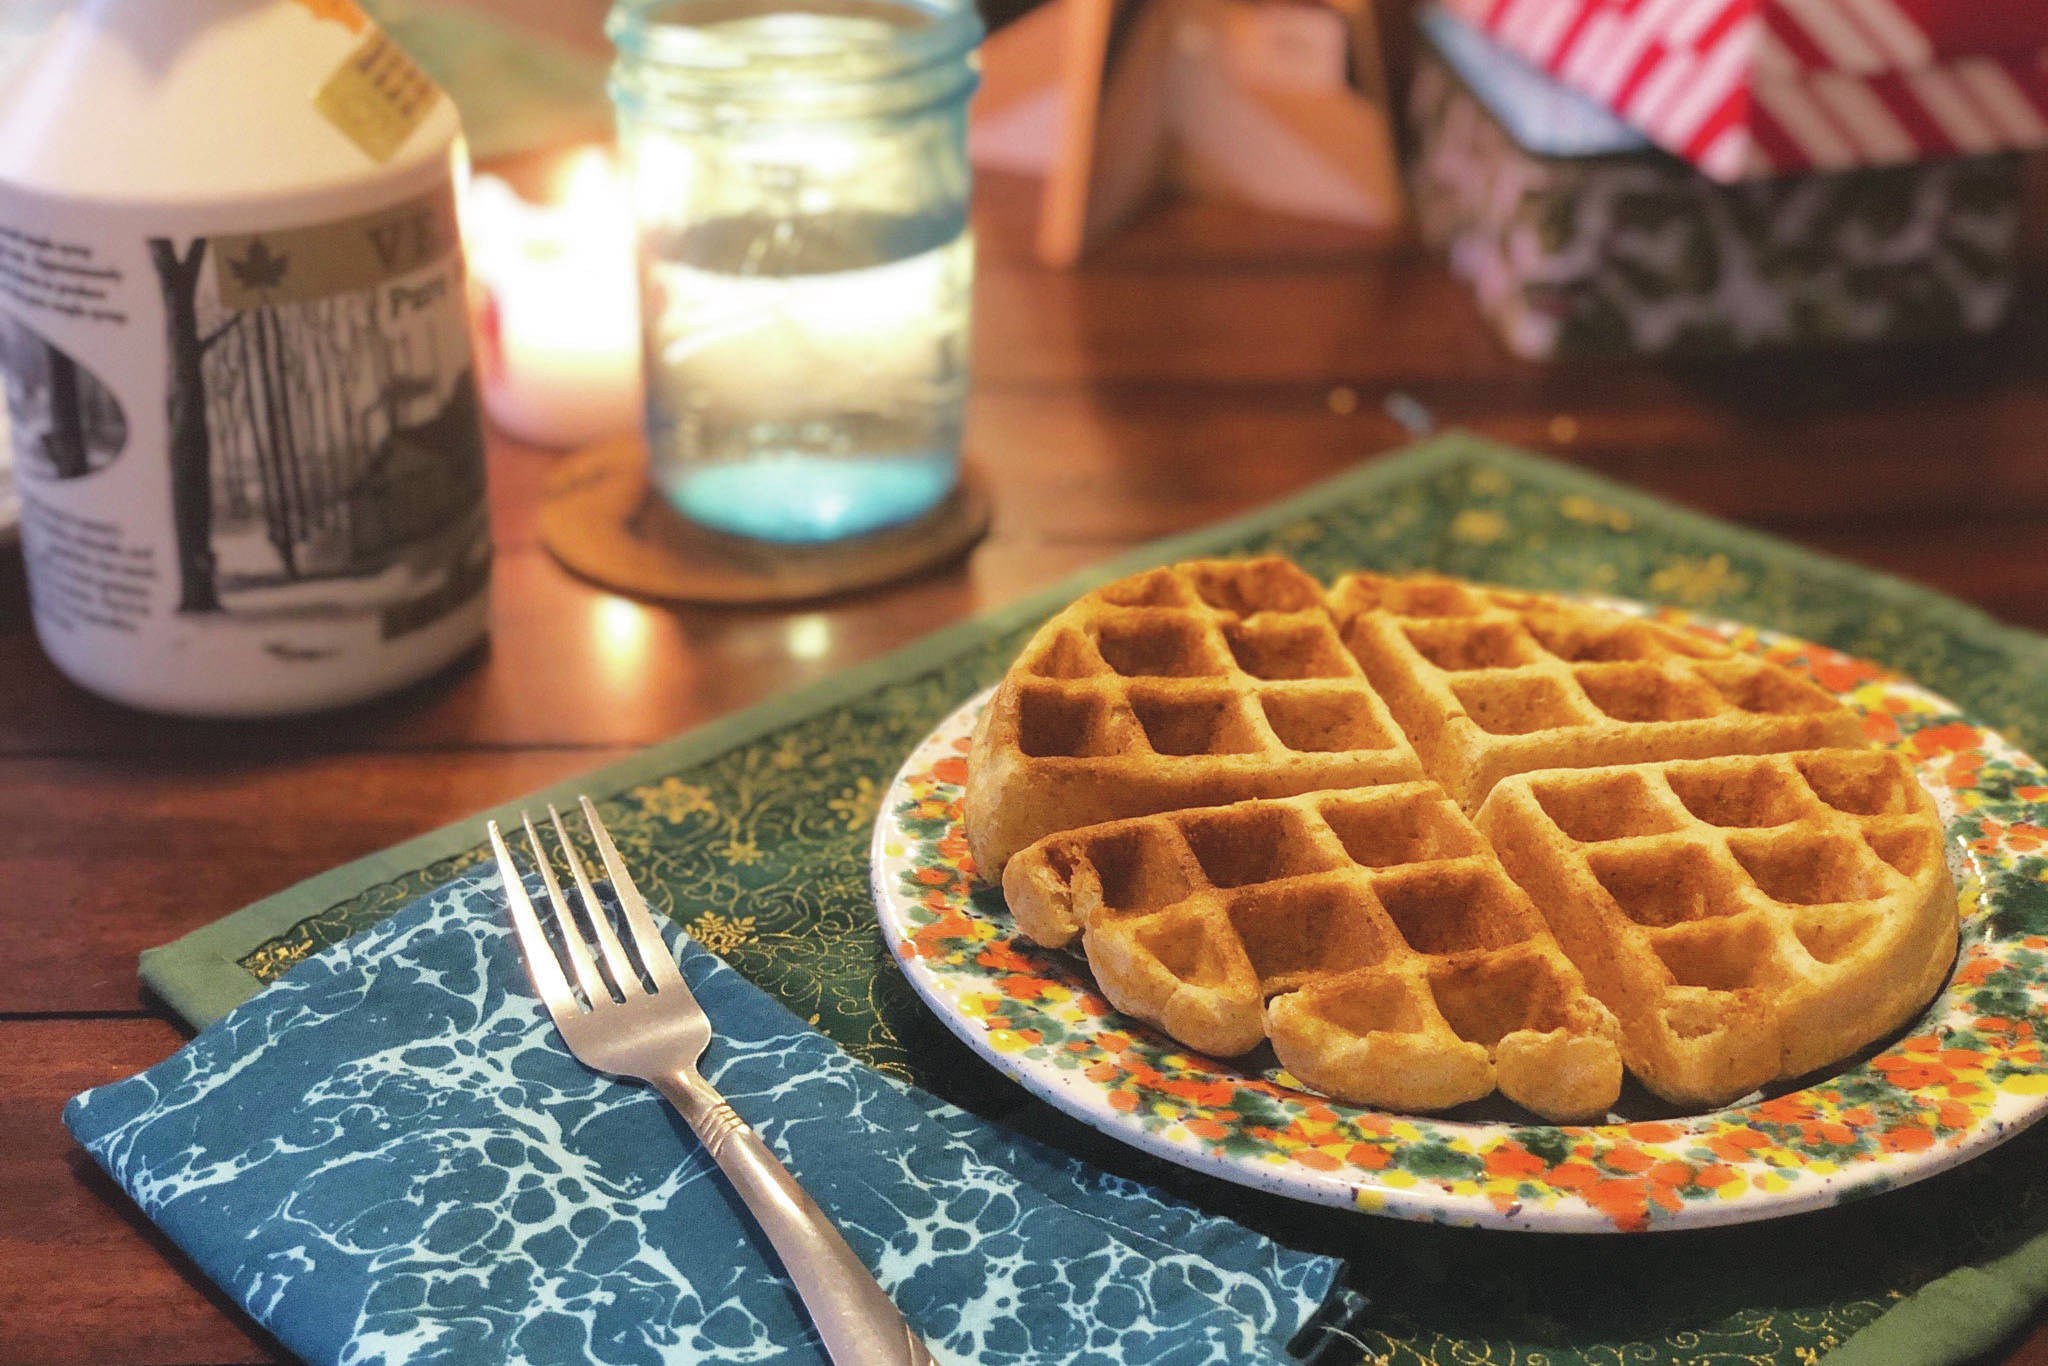 Waffles make mornings better, photographed on Dec. 24, 2020, in Anchorage, Alaska. (Photo by Victoria Petersen/Peninsula Clarion)